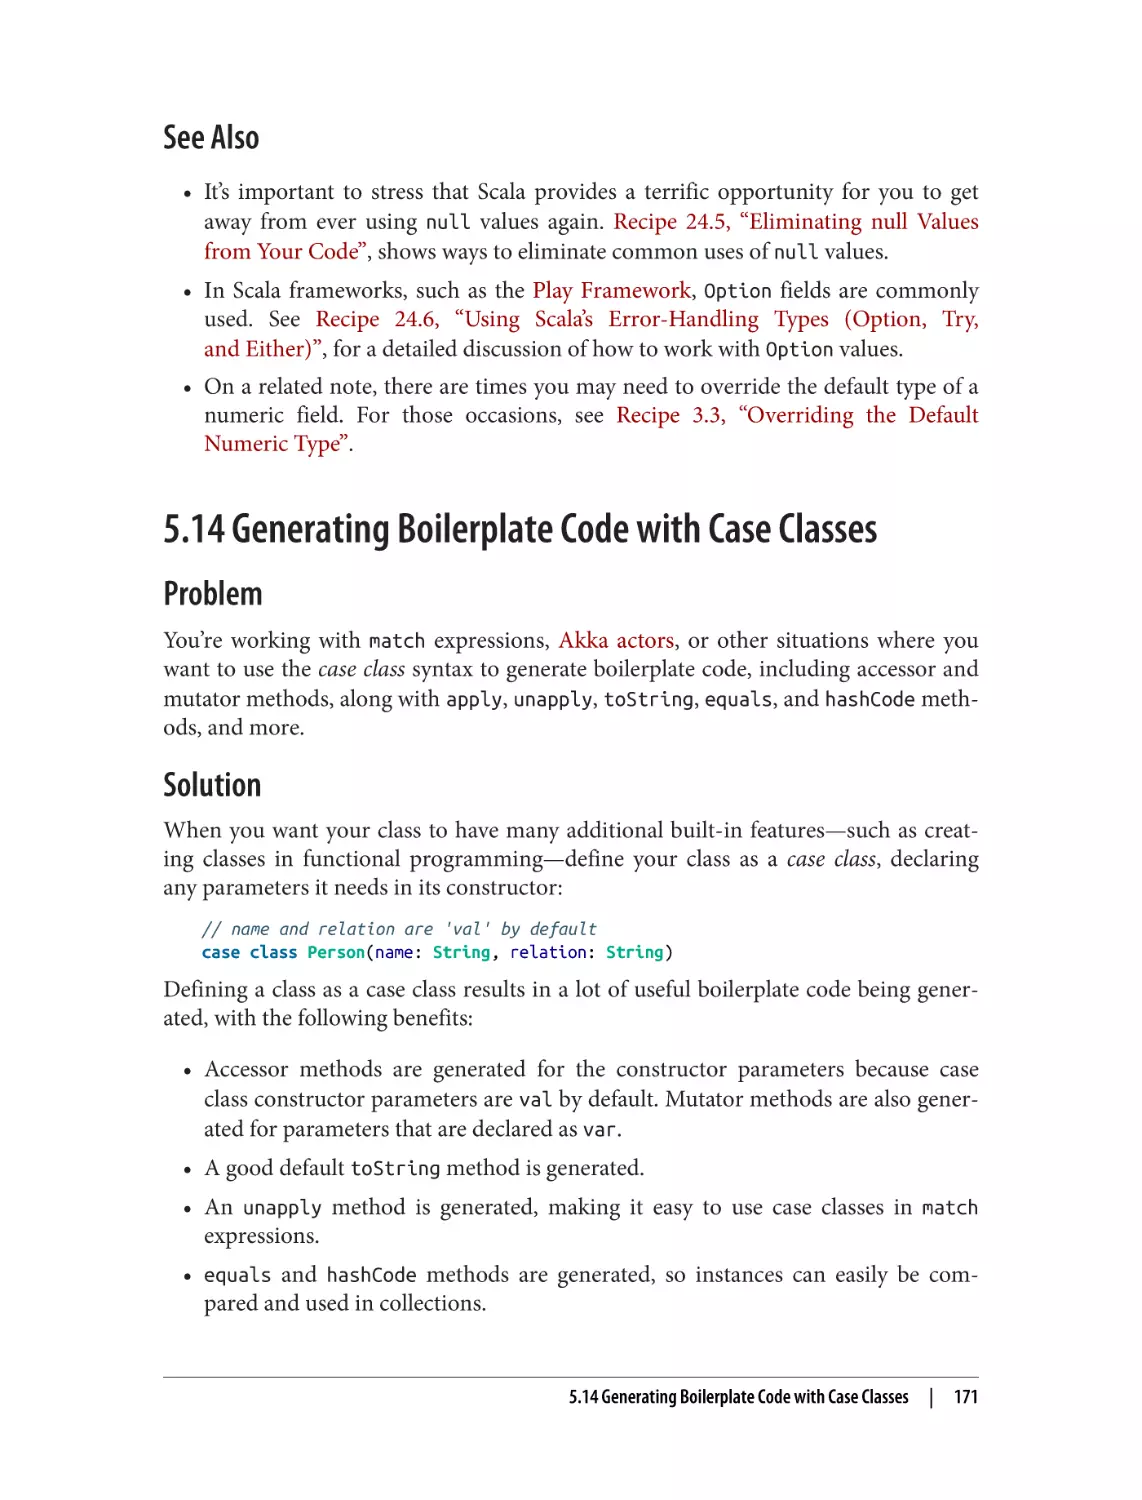 See Also
5.14 Generating Boilerplate Code with Case Classes
Problem
Solution